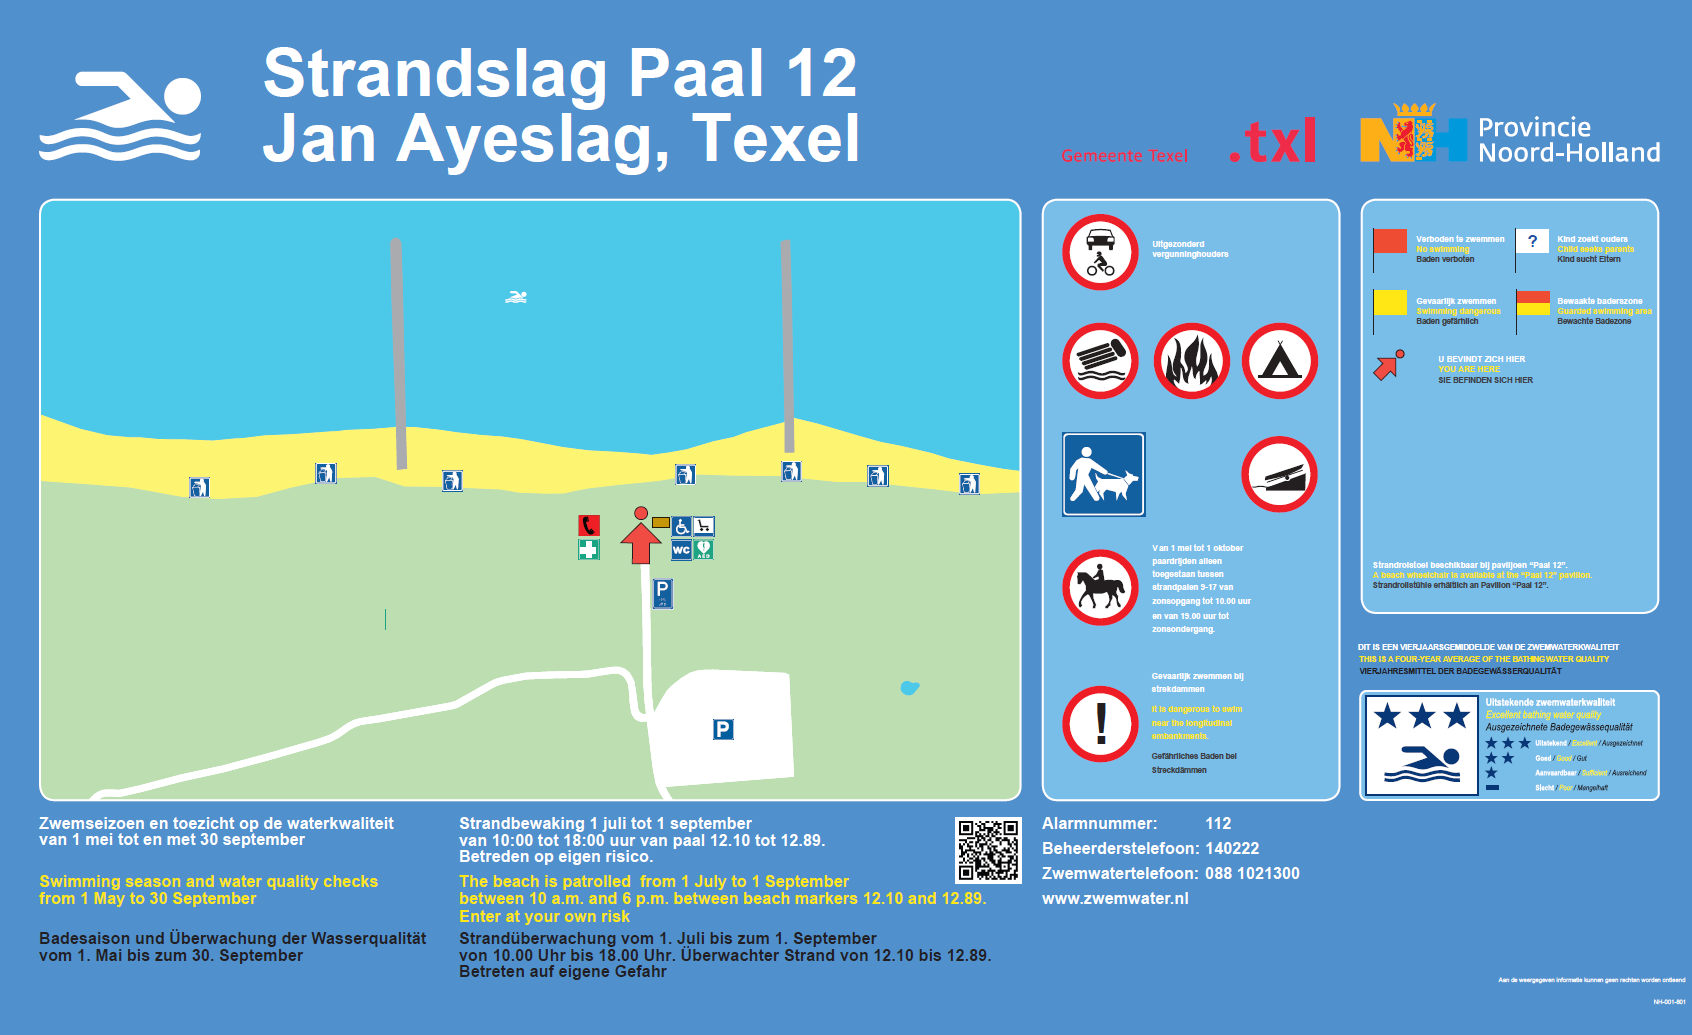 The information board at the swimming location Paal 12 Jan Ayeslag